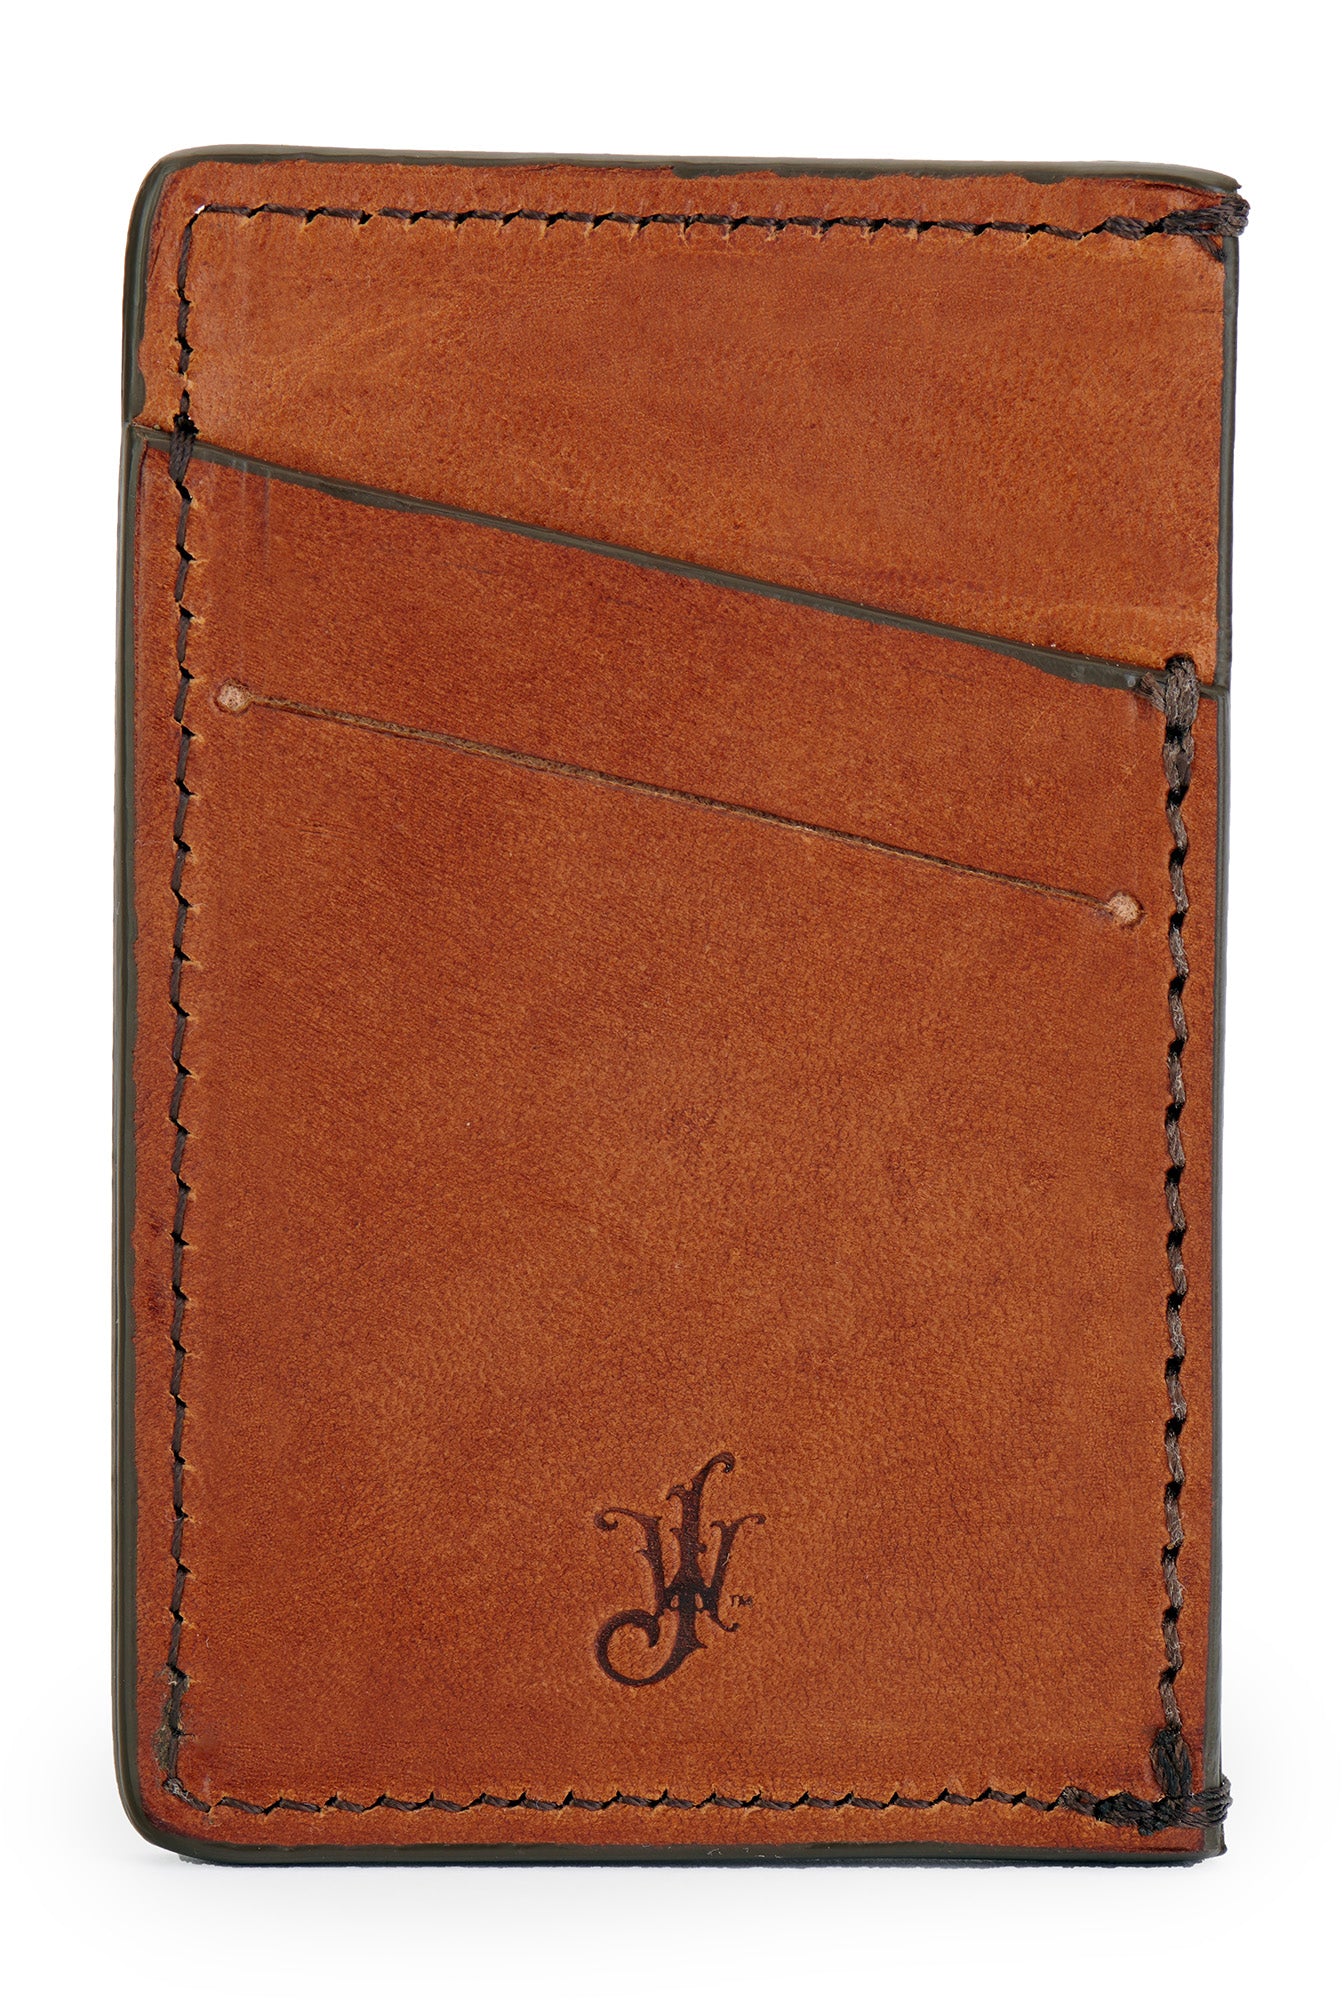 vegetable tanned bridle leather minimalist wallet back empty pictured in saddle tan